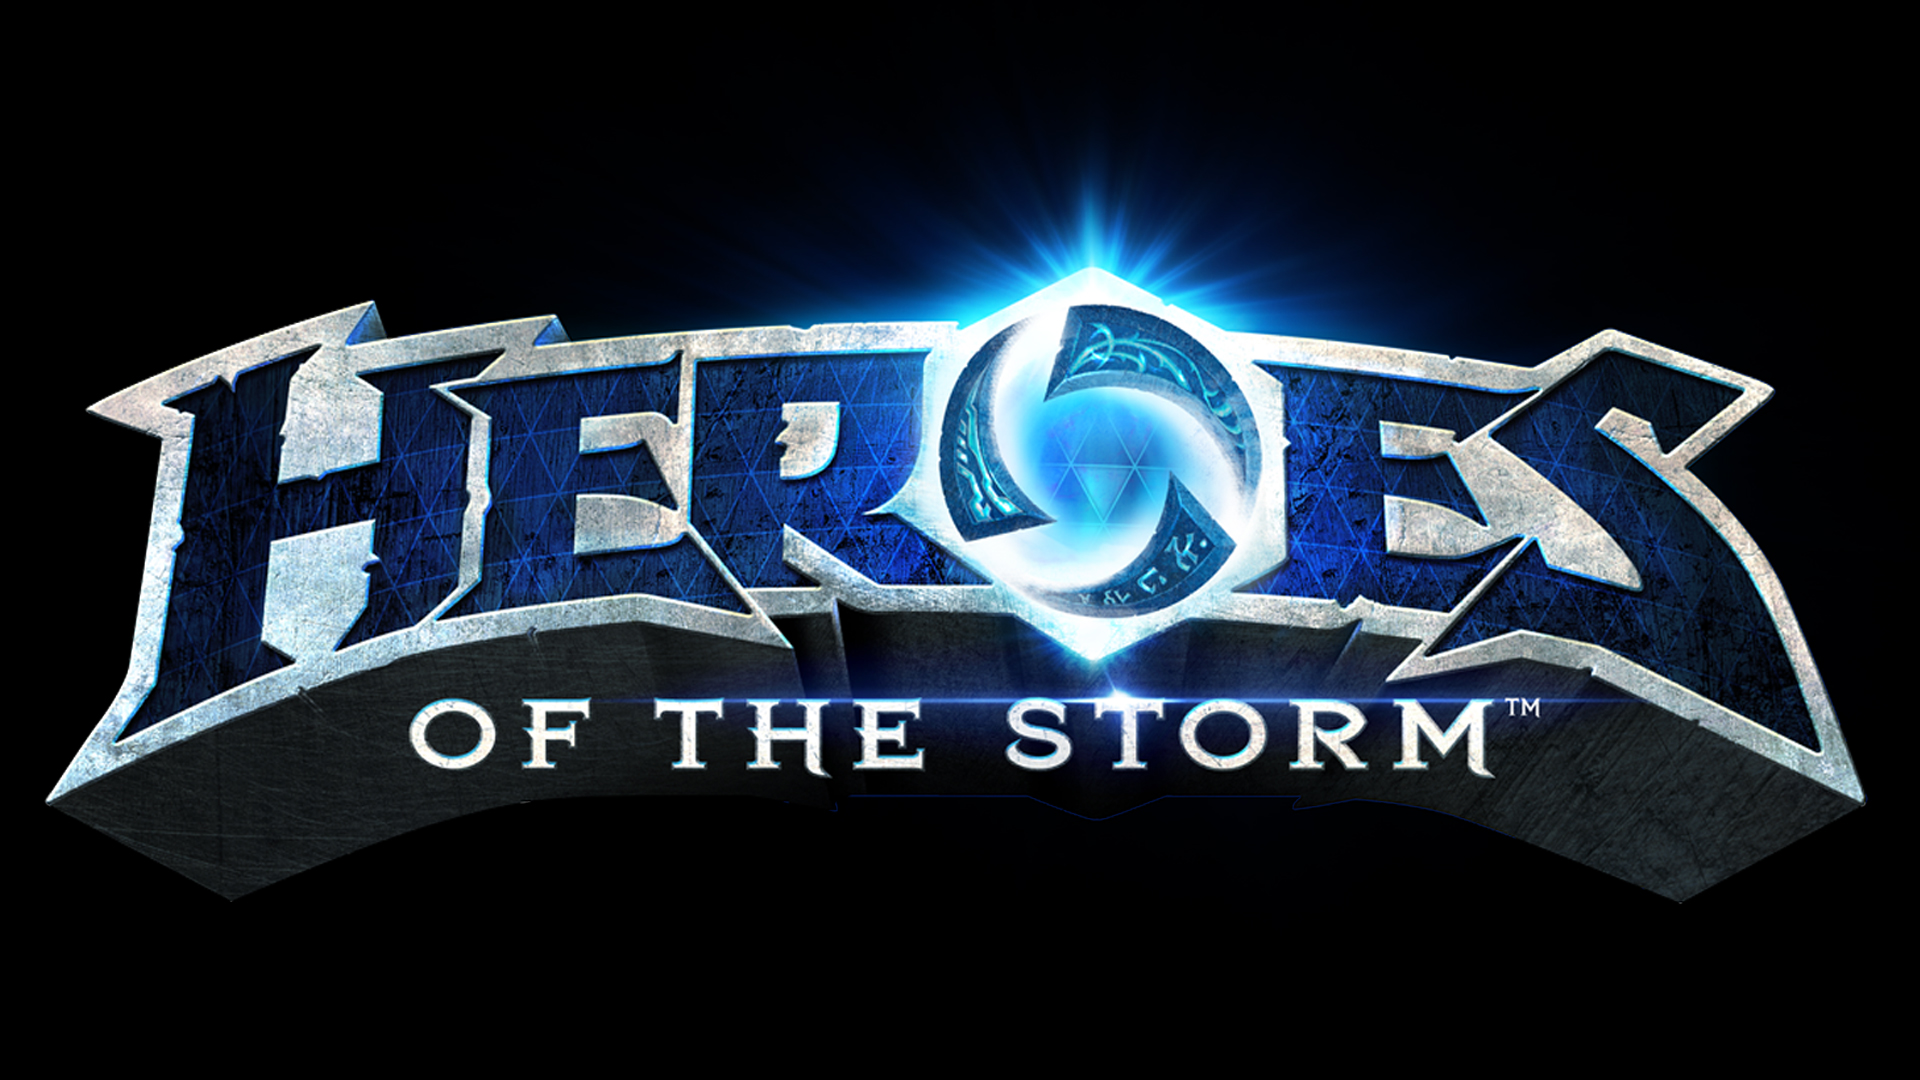 heroes-of-the-storm-logo-1920x1080